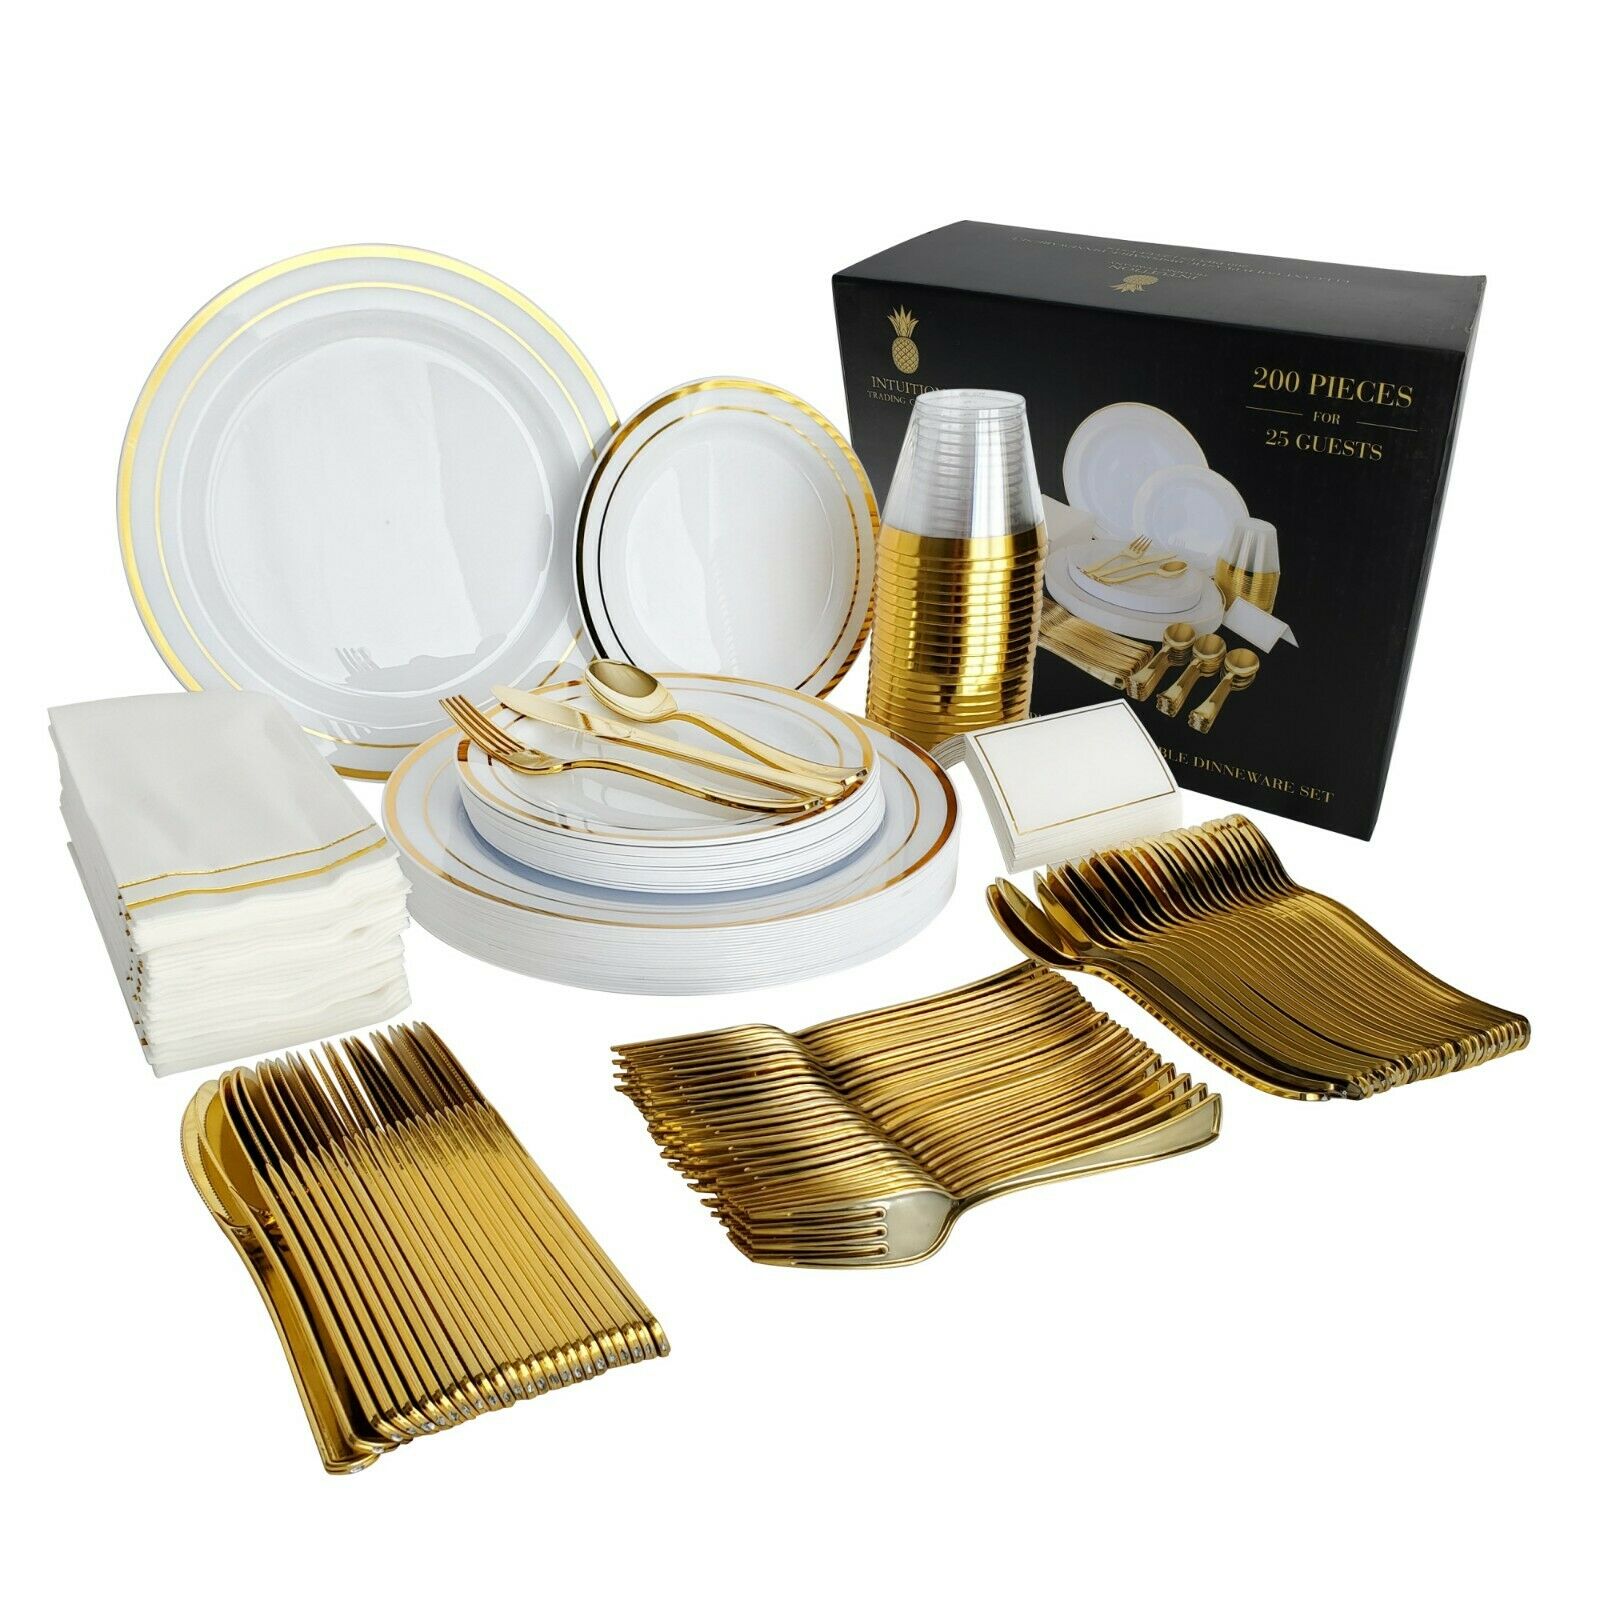 200 Piece Gold Plastic Disposable Dinnerware Set & Plates For 25 Party Guests